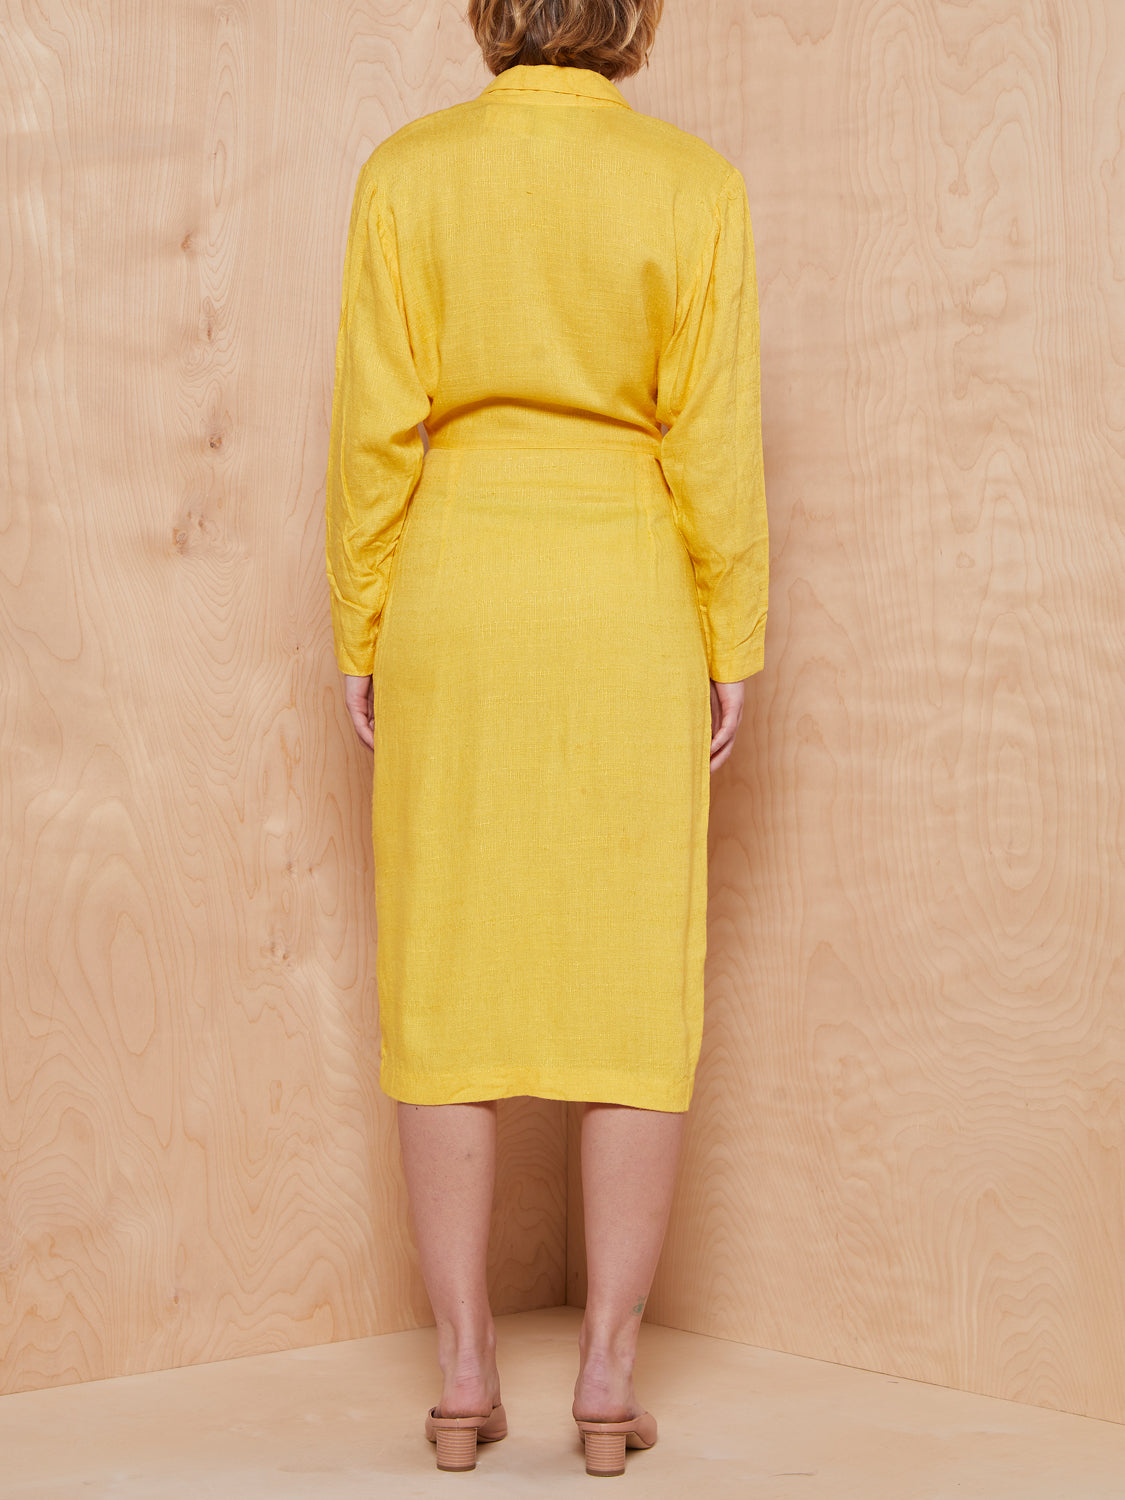 Vintage Yellow Collared Dress